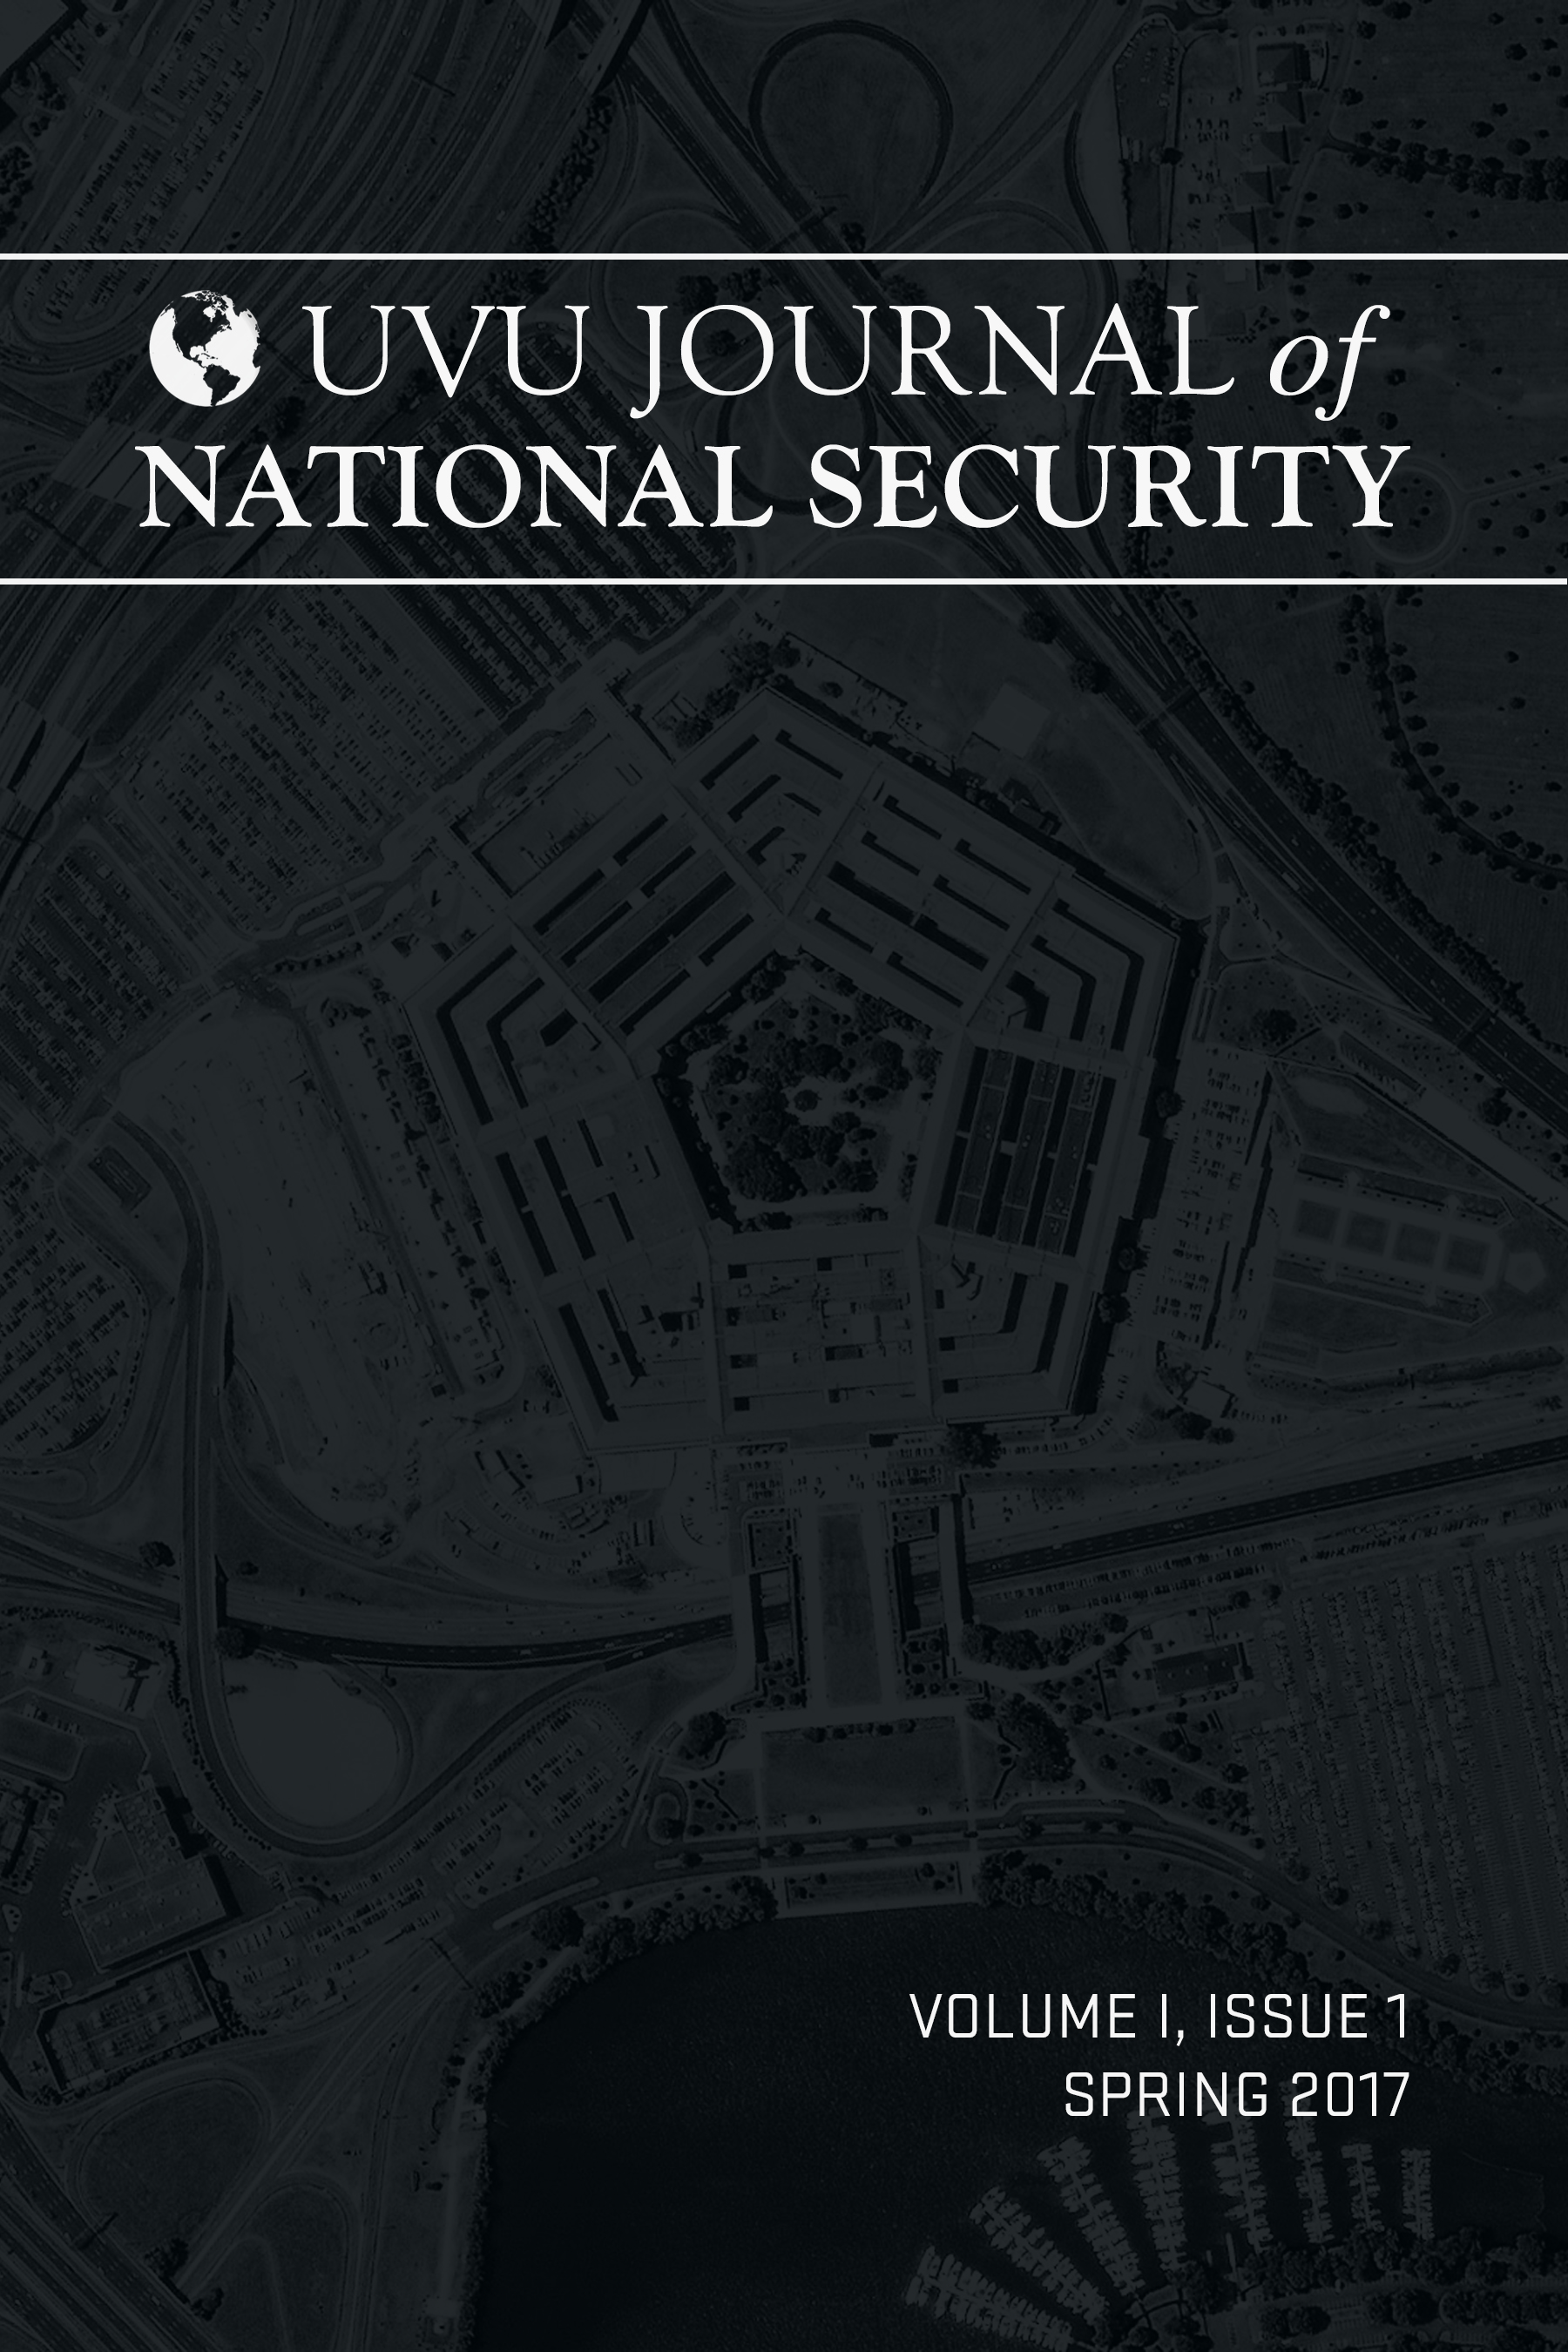 UVU Journal of National Security Volume 1 Issue 1